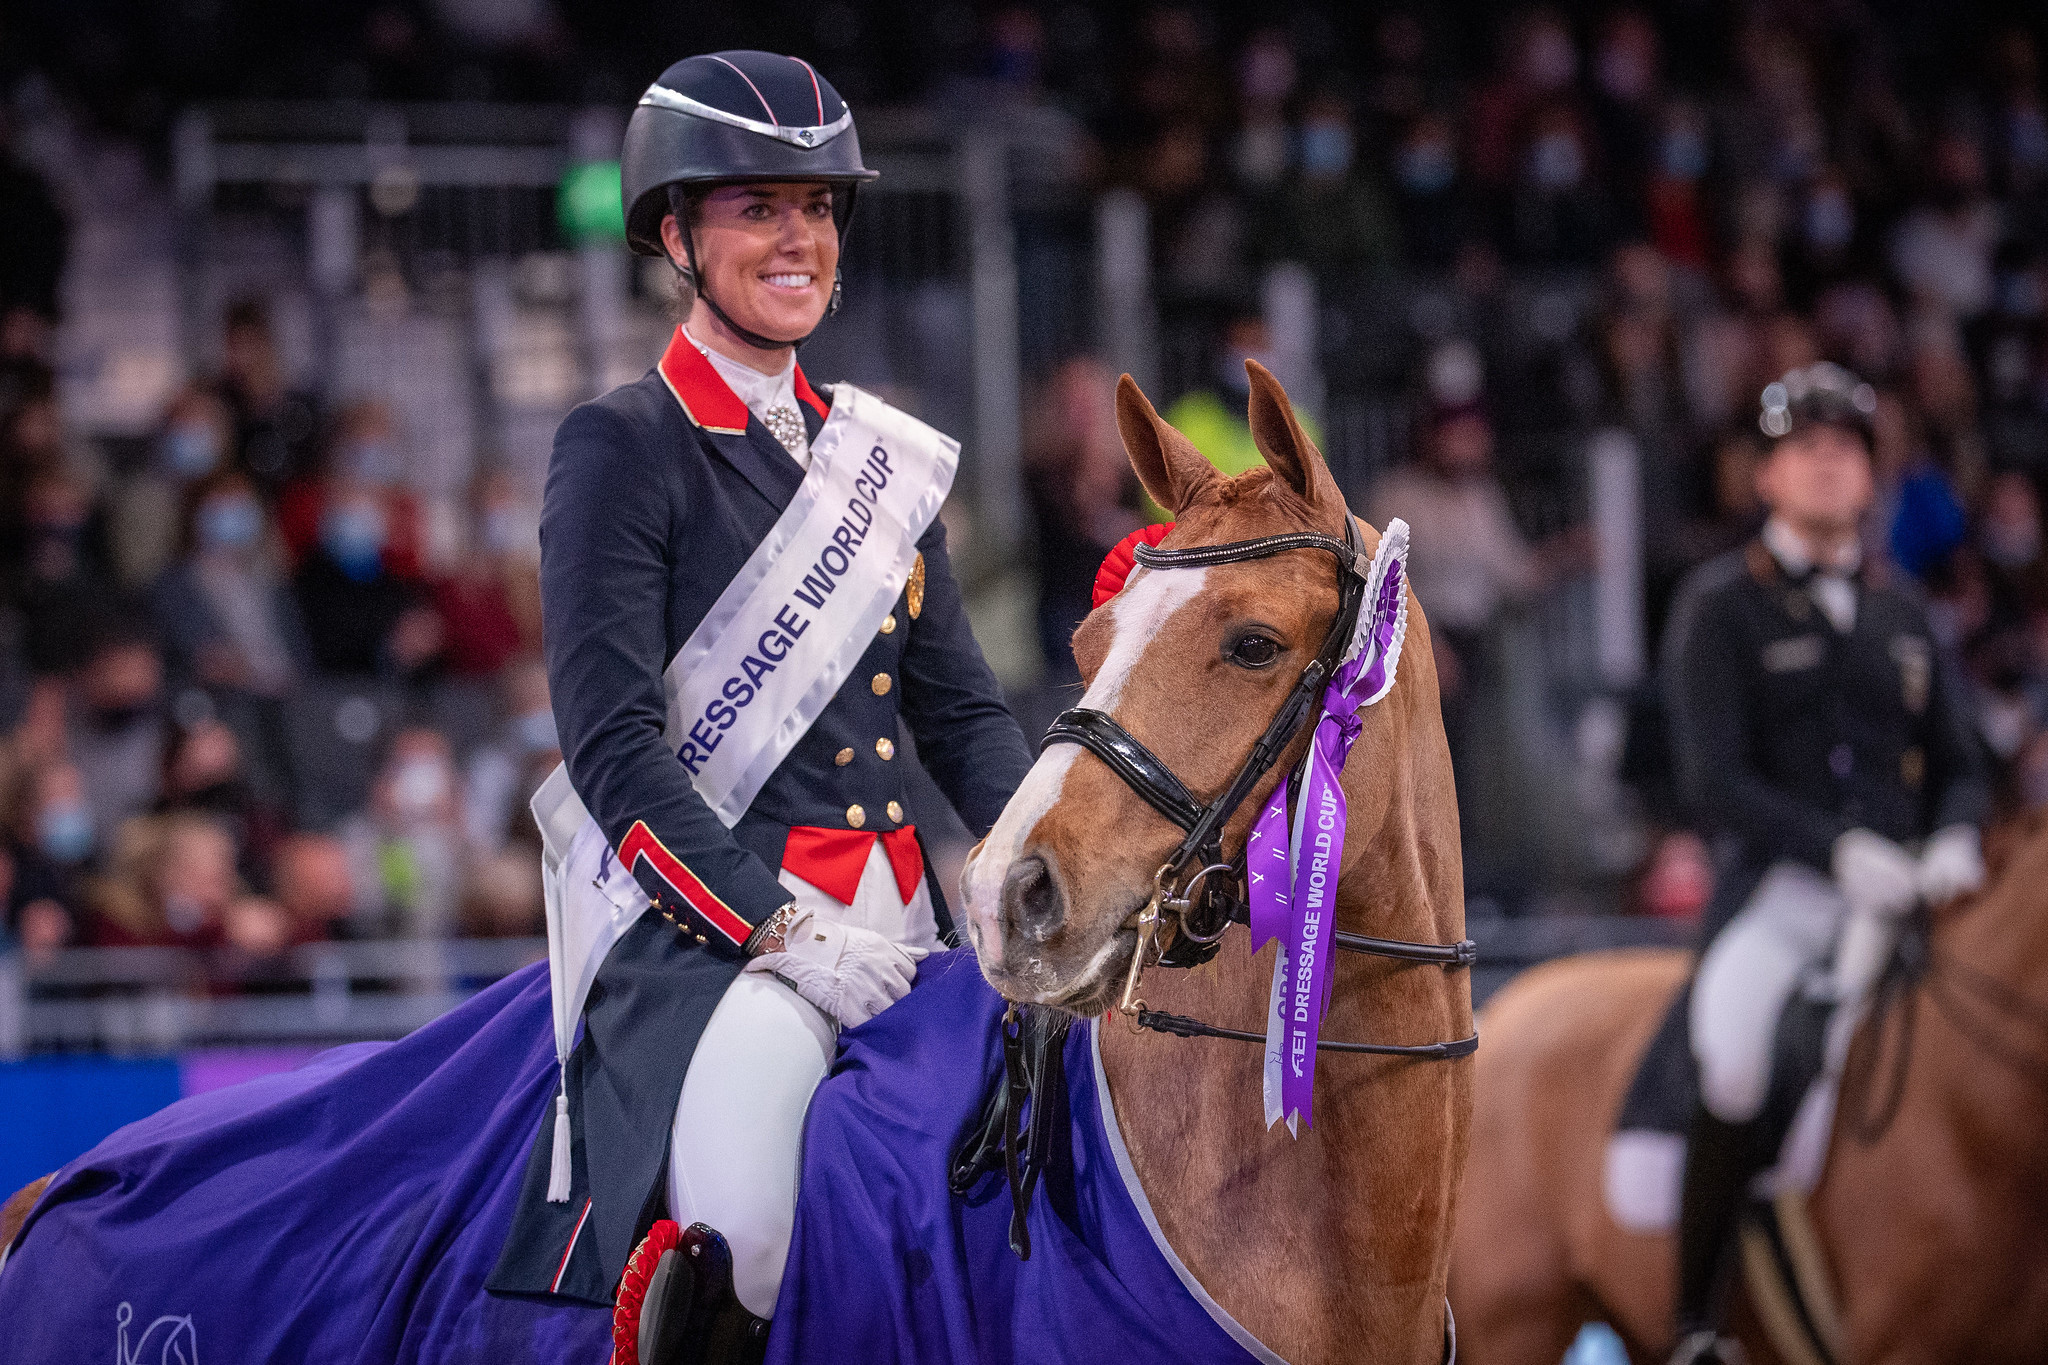 Dujardin wins Dressage World Cup leg in last ride with Gio 